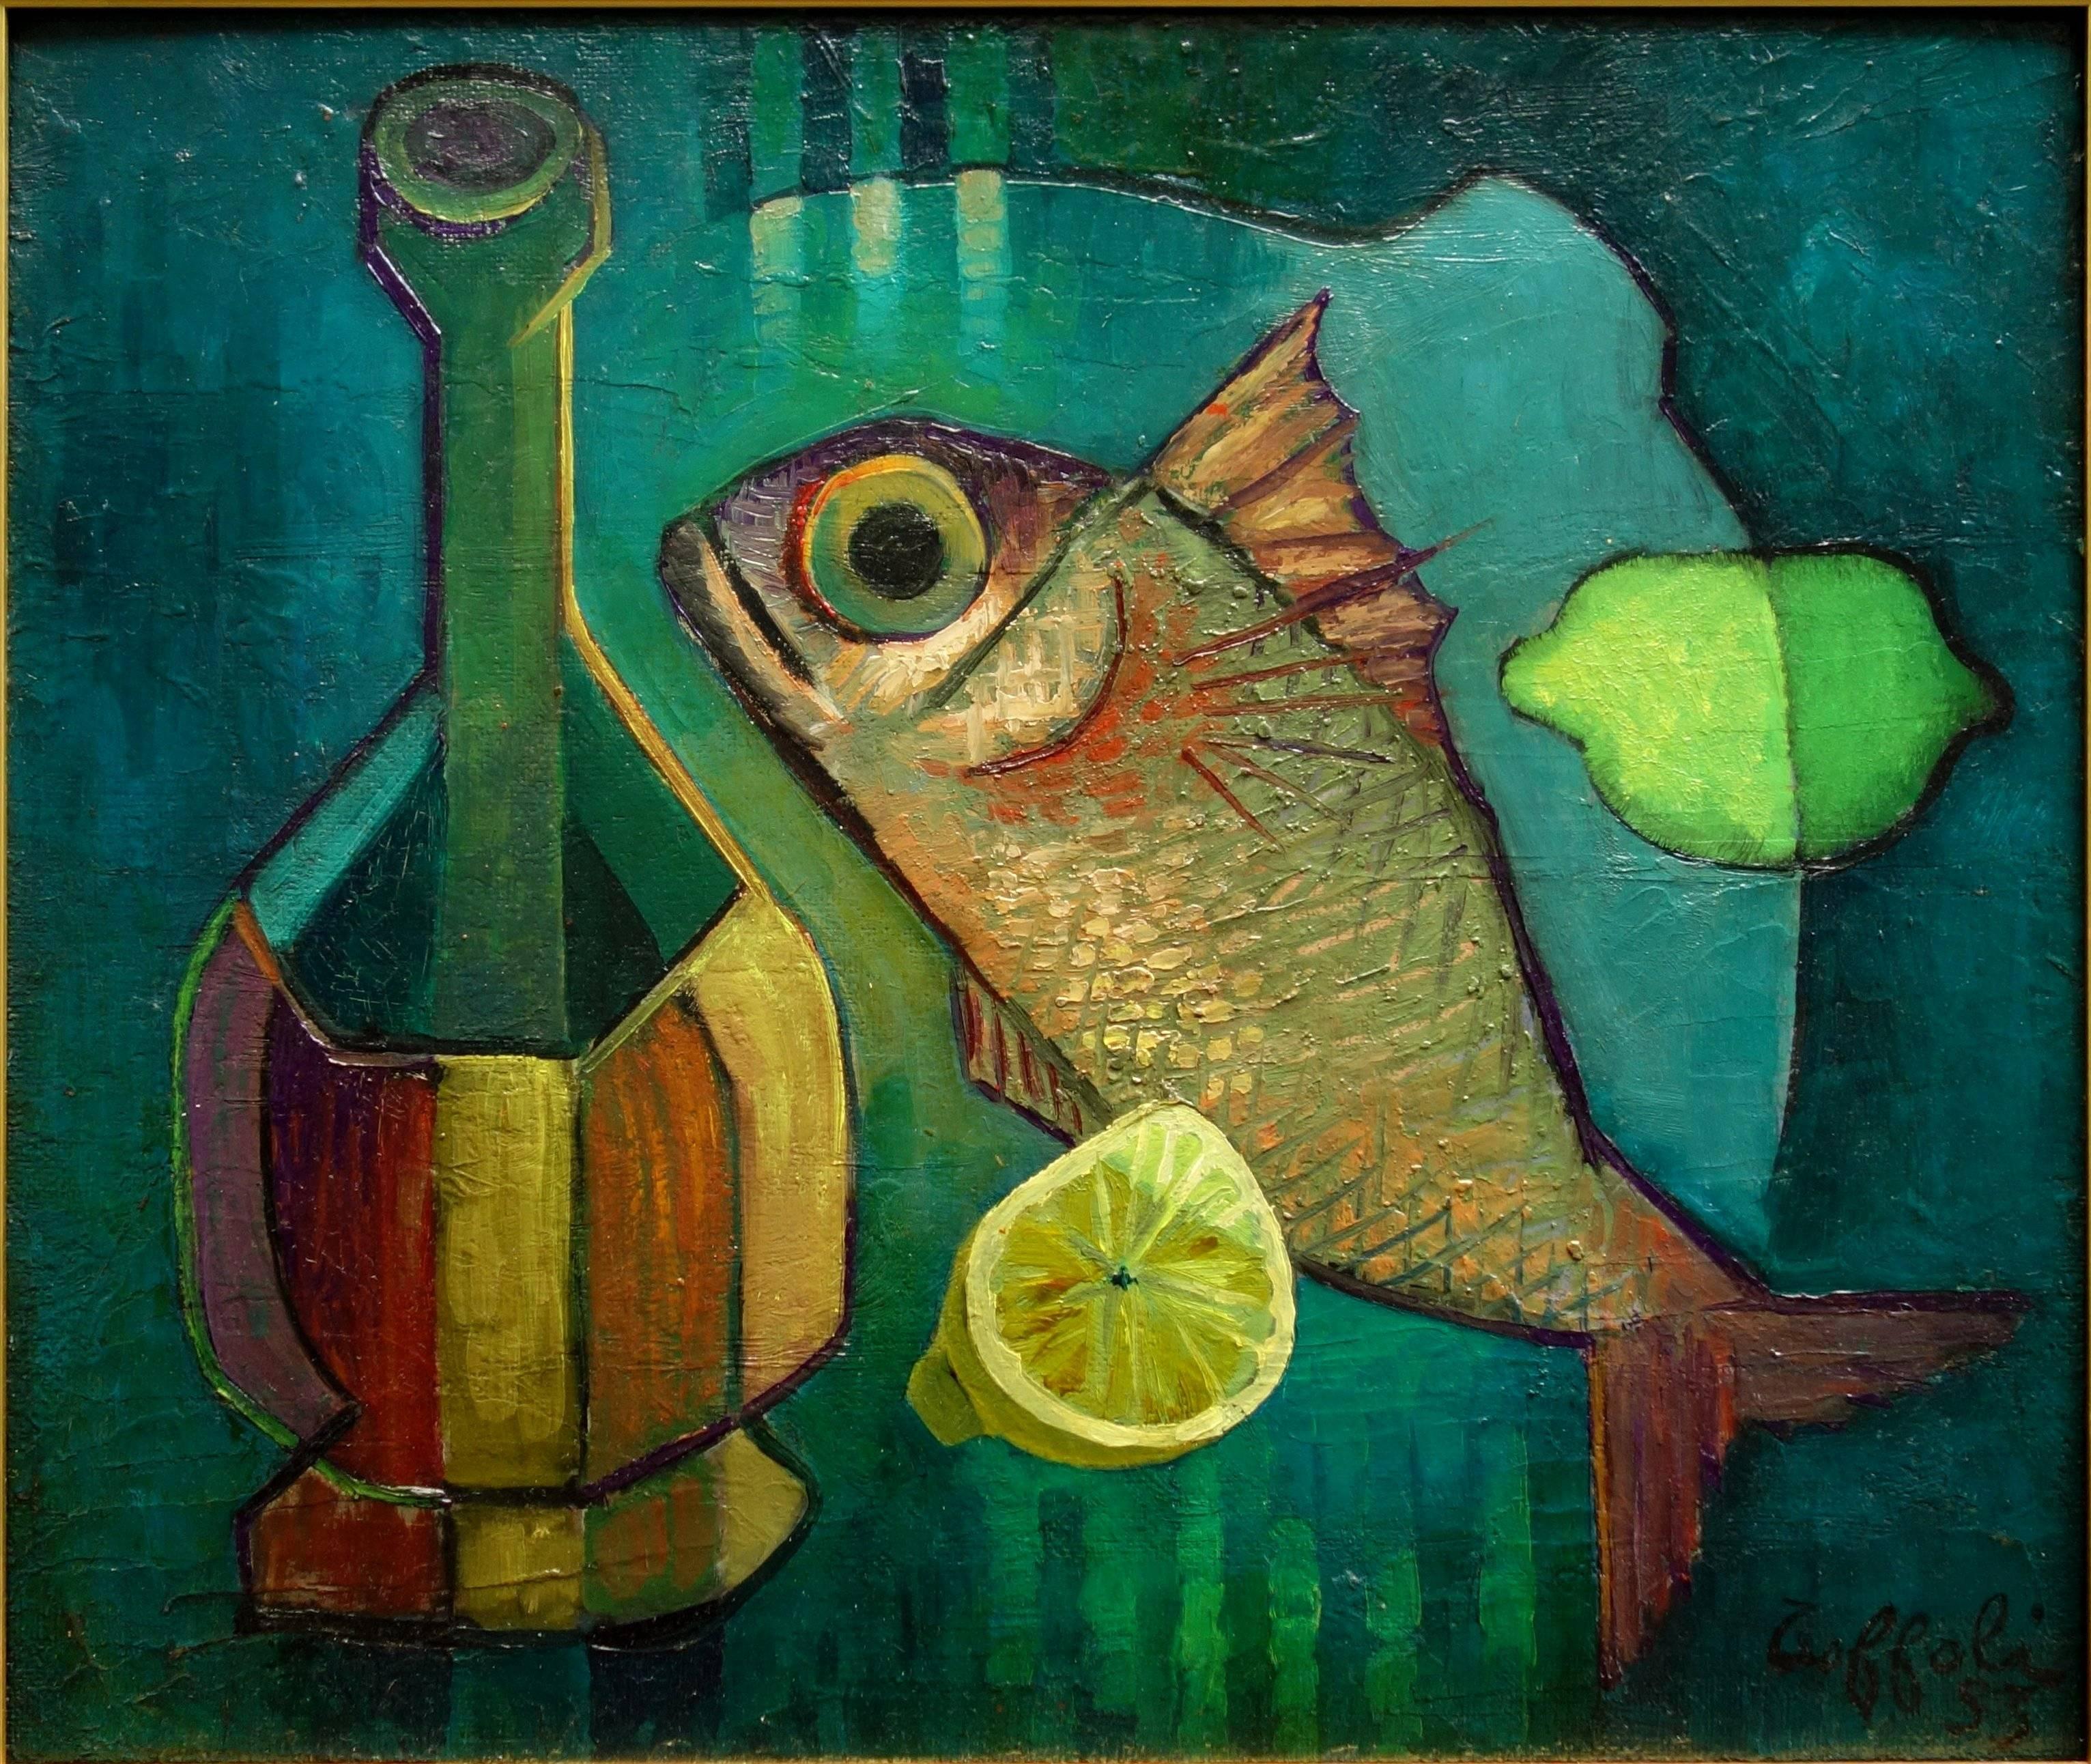 Fish and Bottle - Original oil painting - Signed - Modern Painting by Louis Toffoli